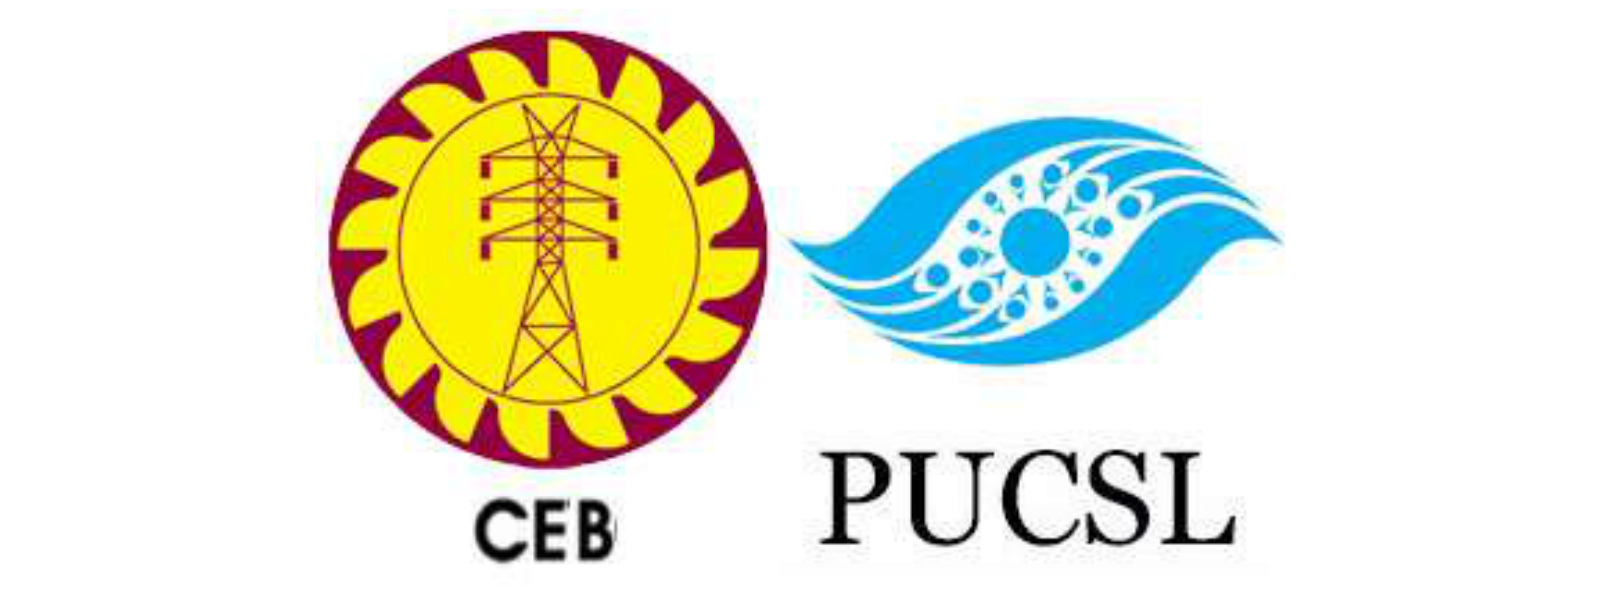 Power Cuts to reduce considerably - PUCSL